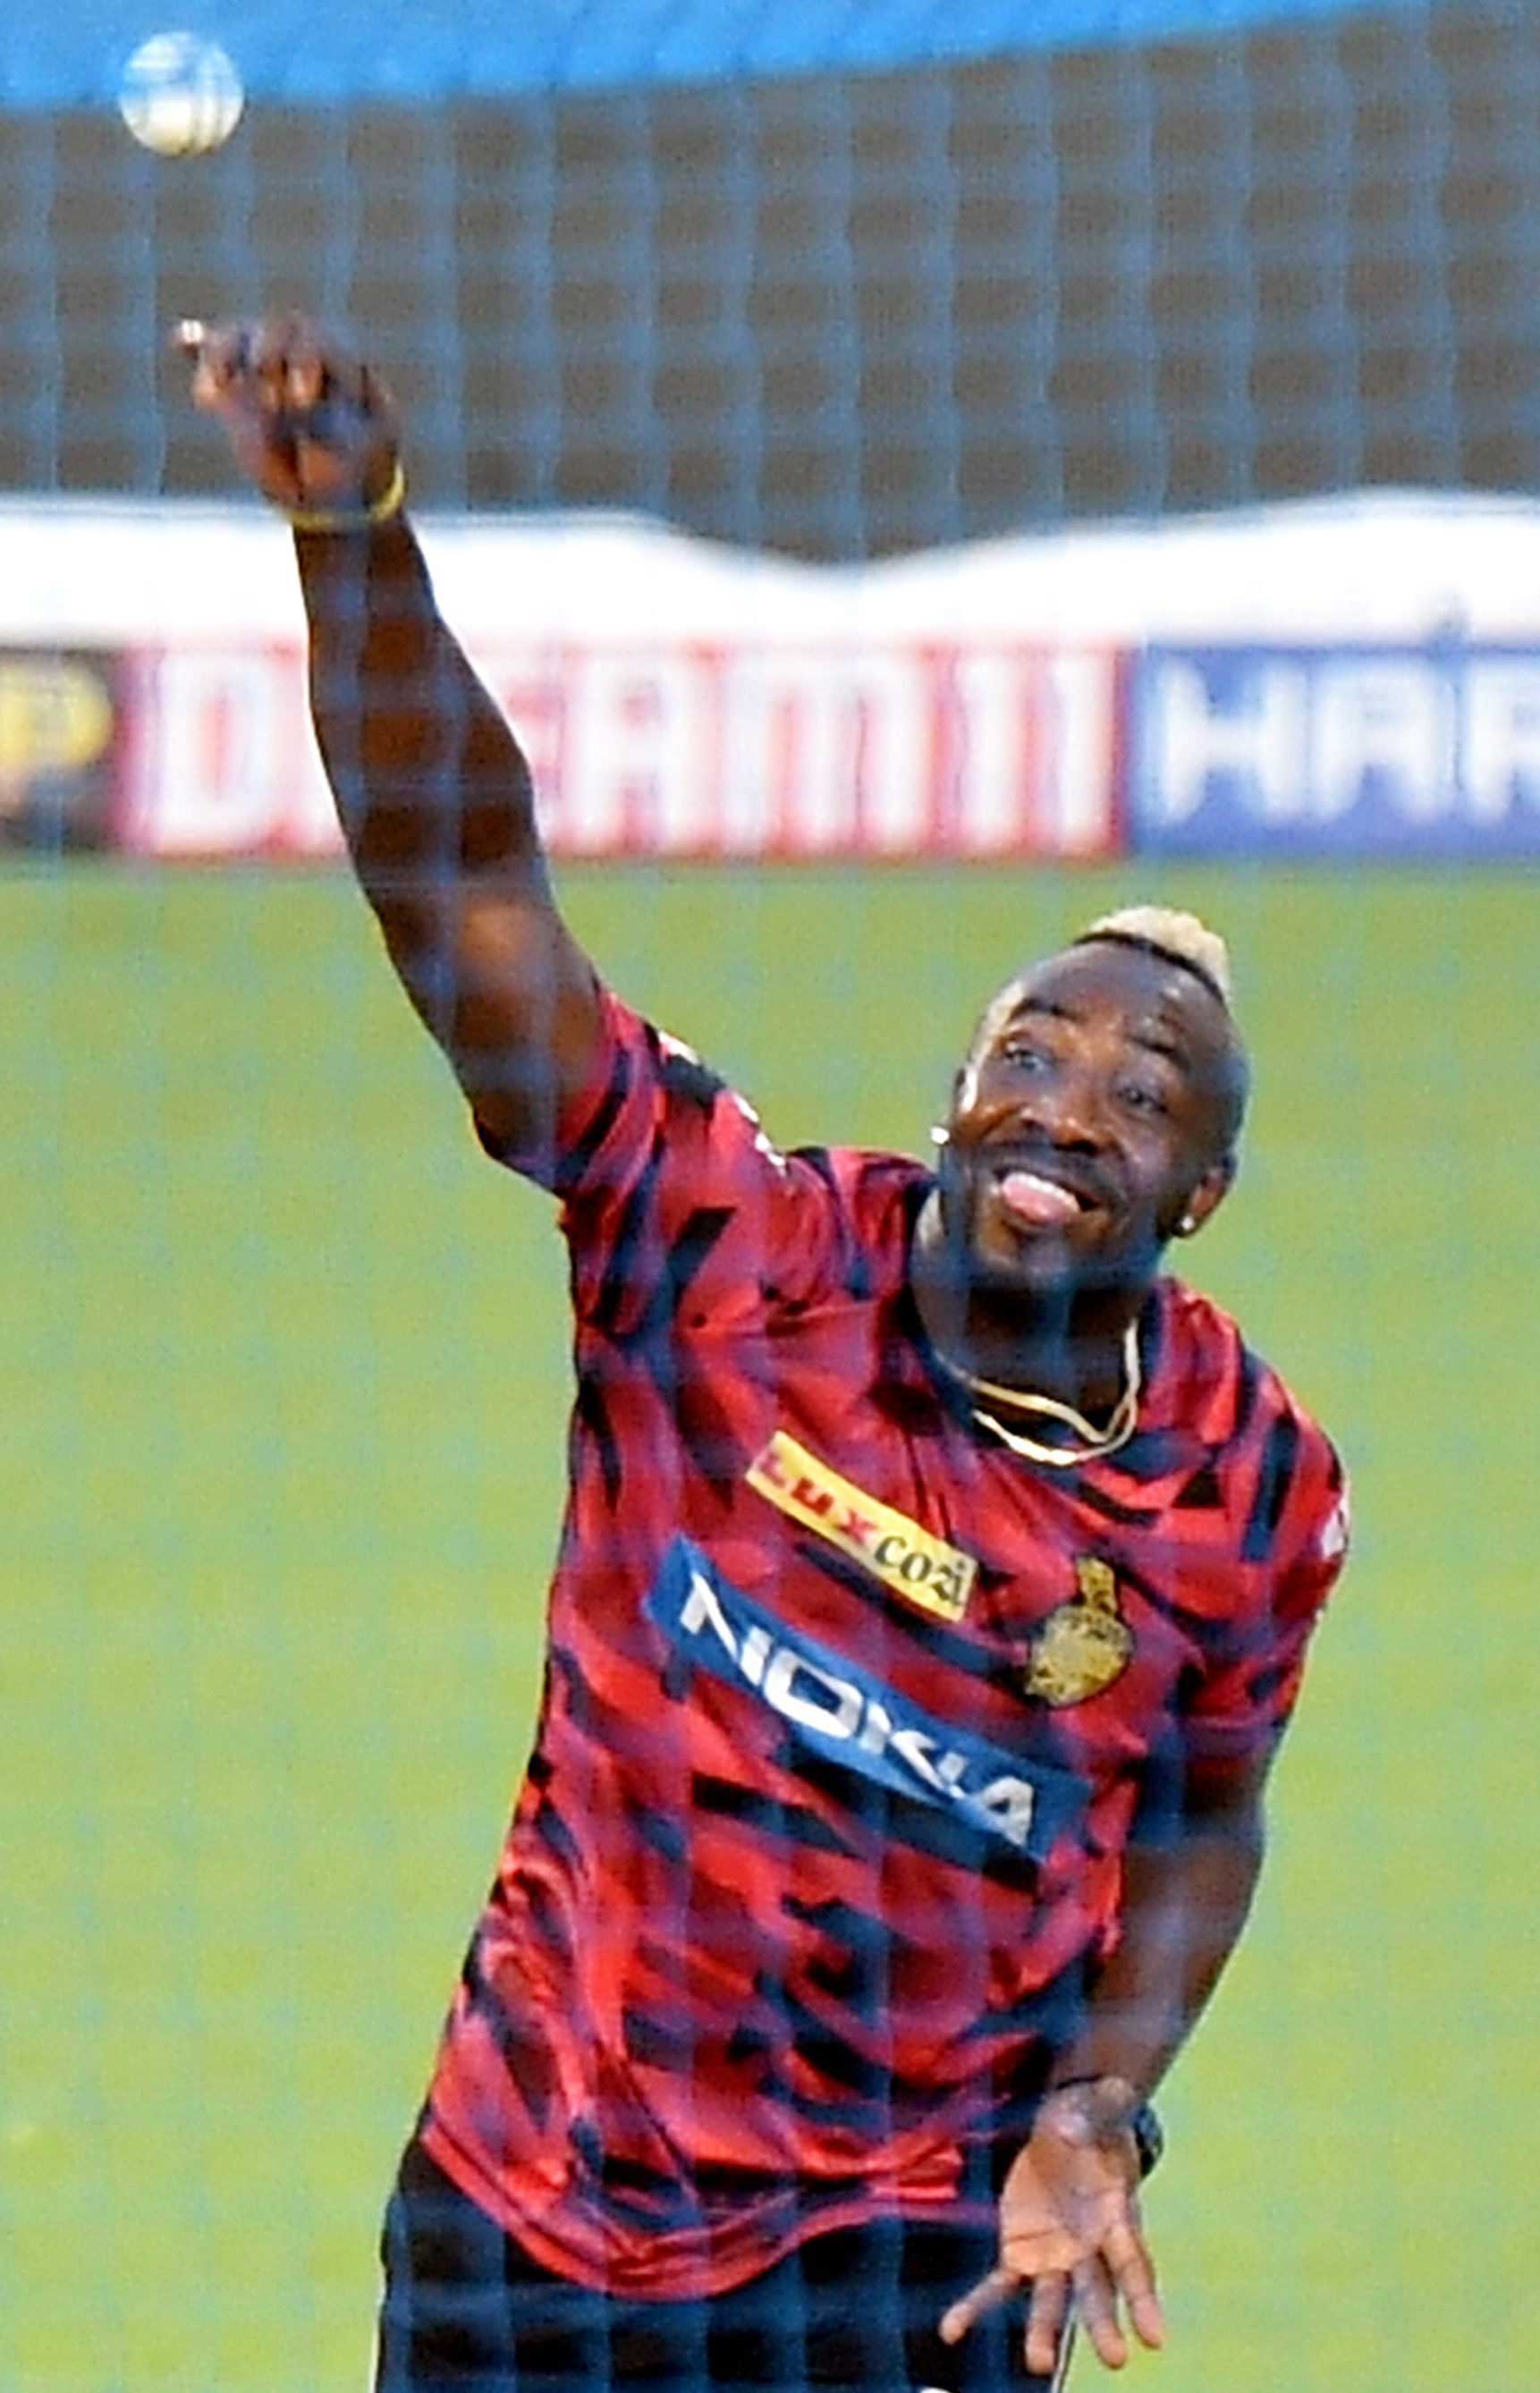 Andre Russell during a training session ahead of the IPL cricket match between KKR and Mumbai Indians, in Calcutta, on April 27, 2019. 